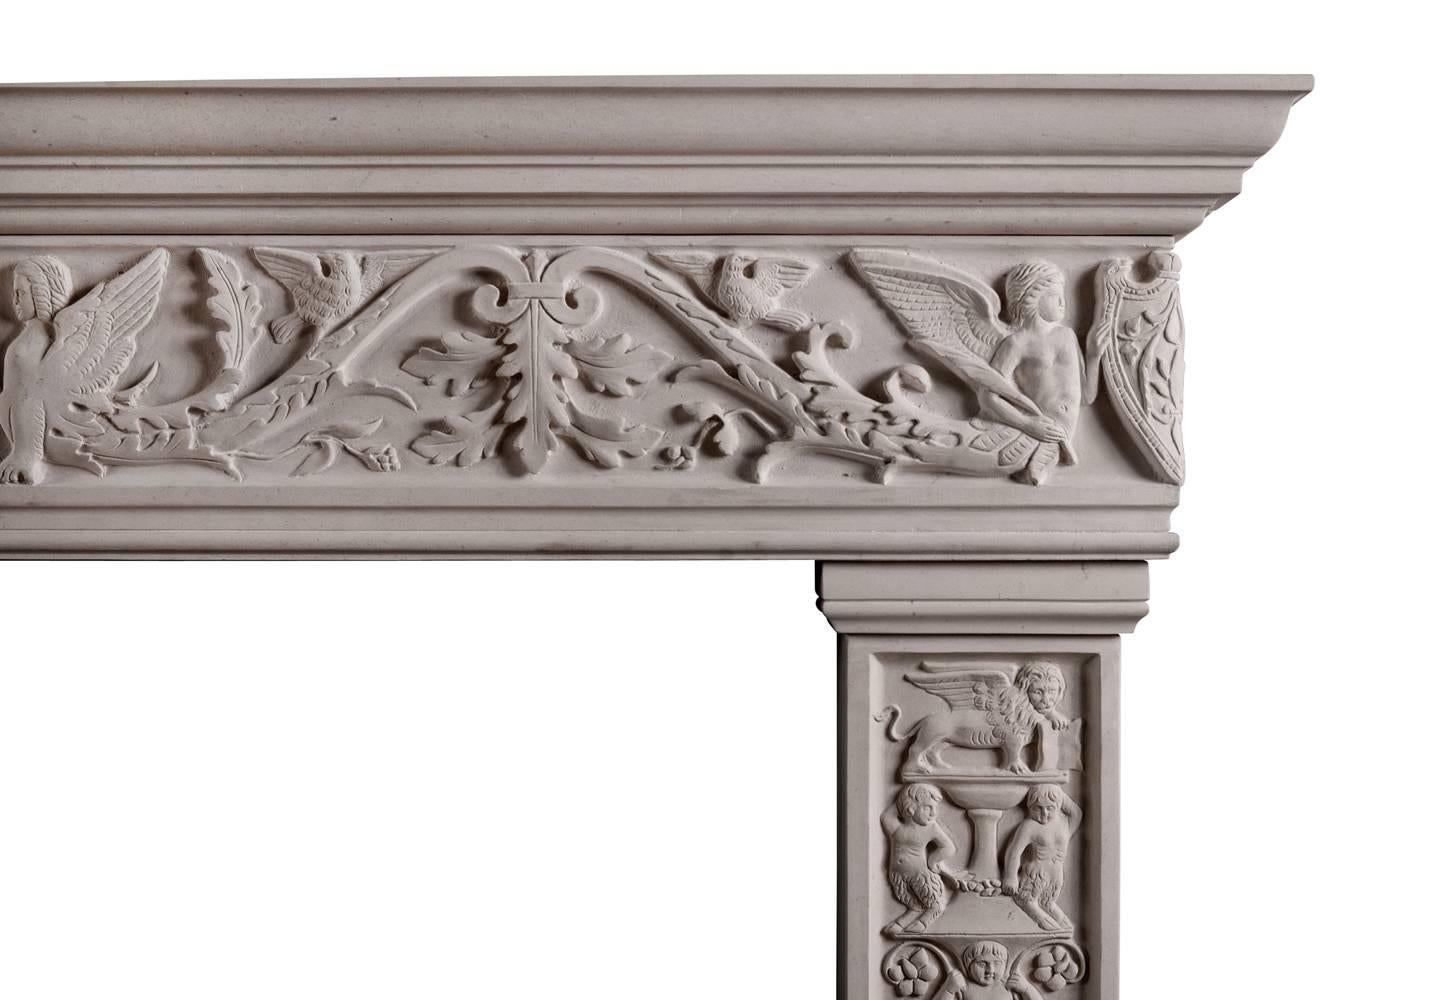 A heavily carved Italian stone fireplace. The frieze with heraldic lion juxtaposed by winged figures, birds and foliage, the jambs with putti, and heraldic figures, urns, stalks and sphynx to base. A copy of an earlier piece.

Shelf width - 1580 mm